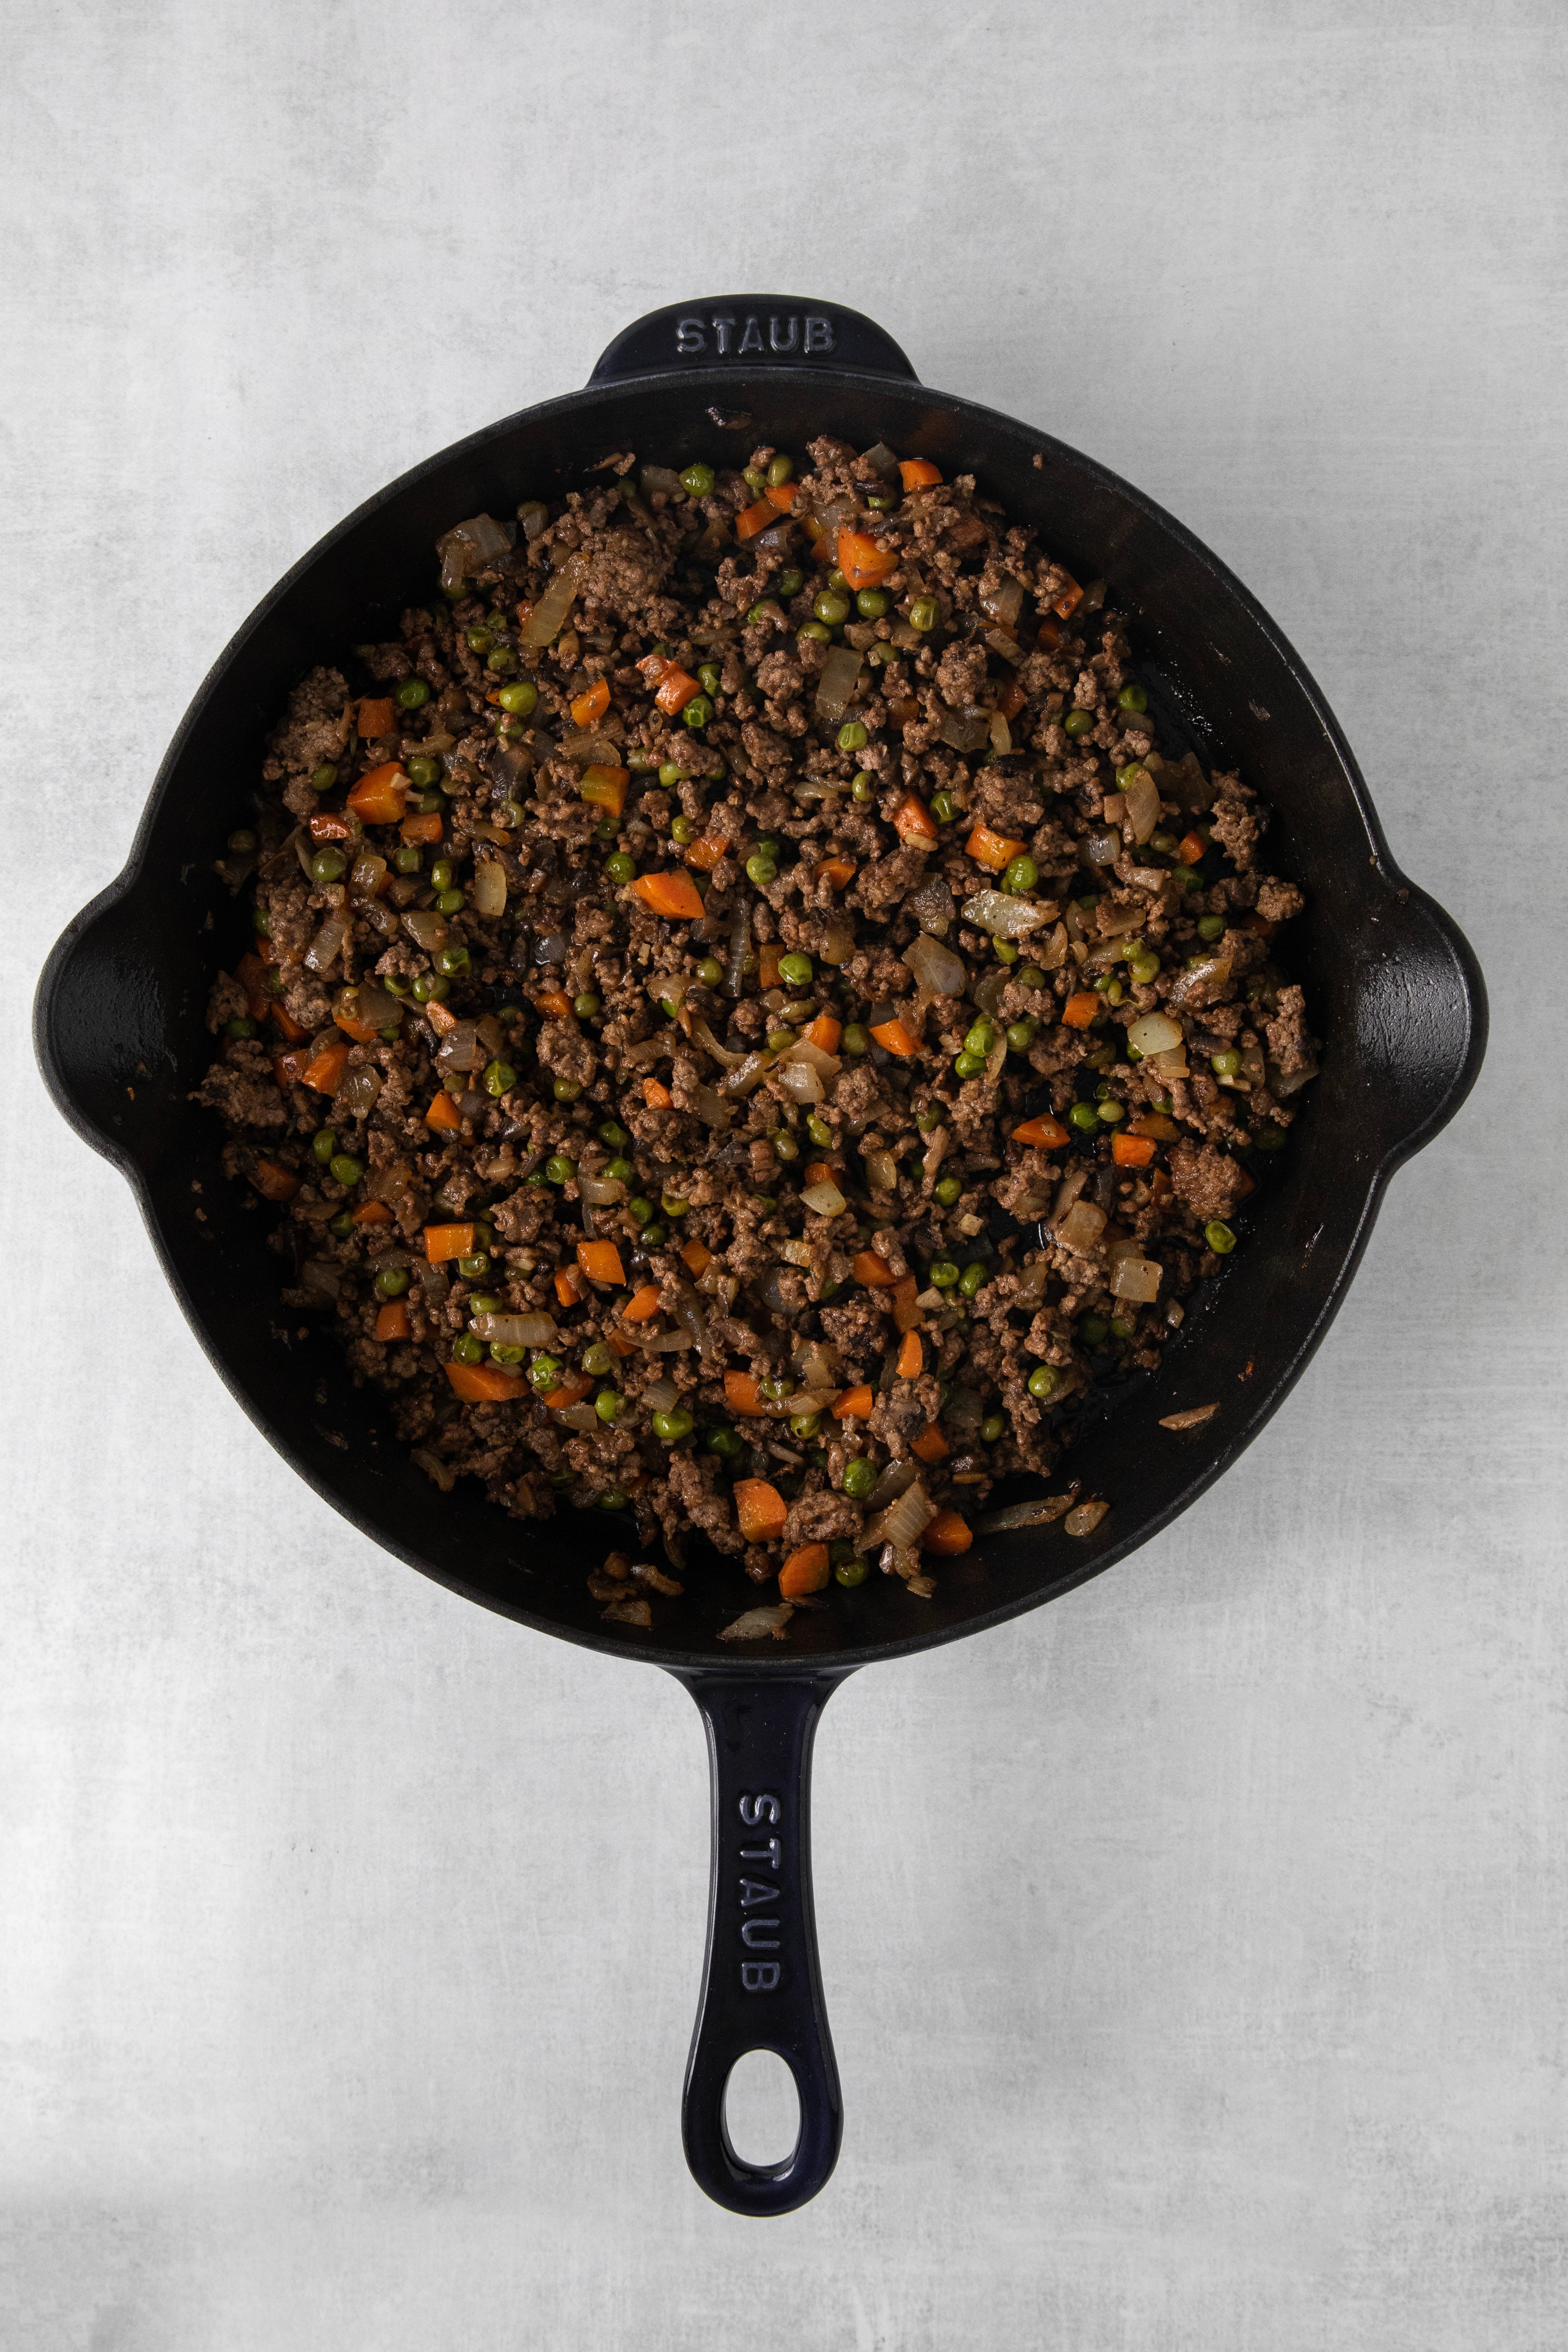 cooked ground beef and veggies in a skillet.